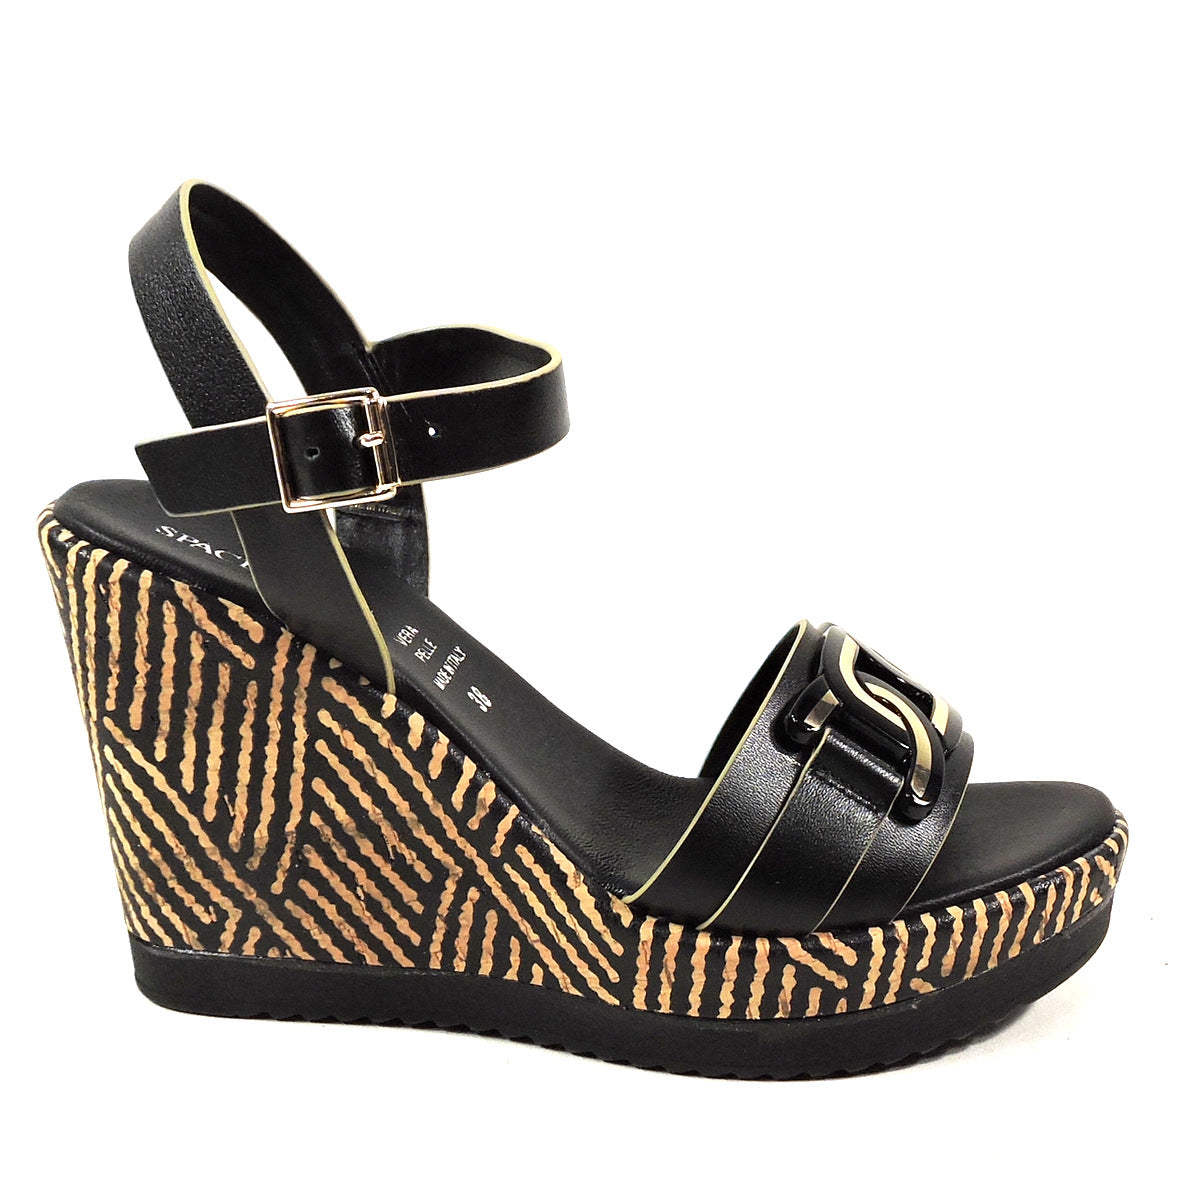 SPACE MODA PHIL GATIÈR BY REPO 🇮🇹 WOMENS BLACK LEATHER COMFORT WEDGED SANDALS